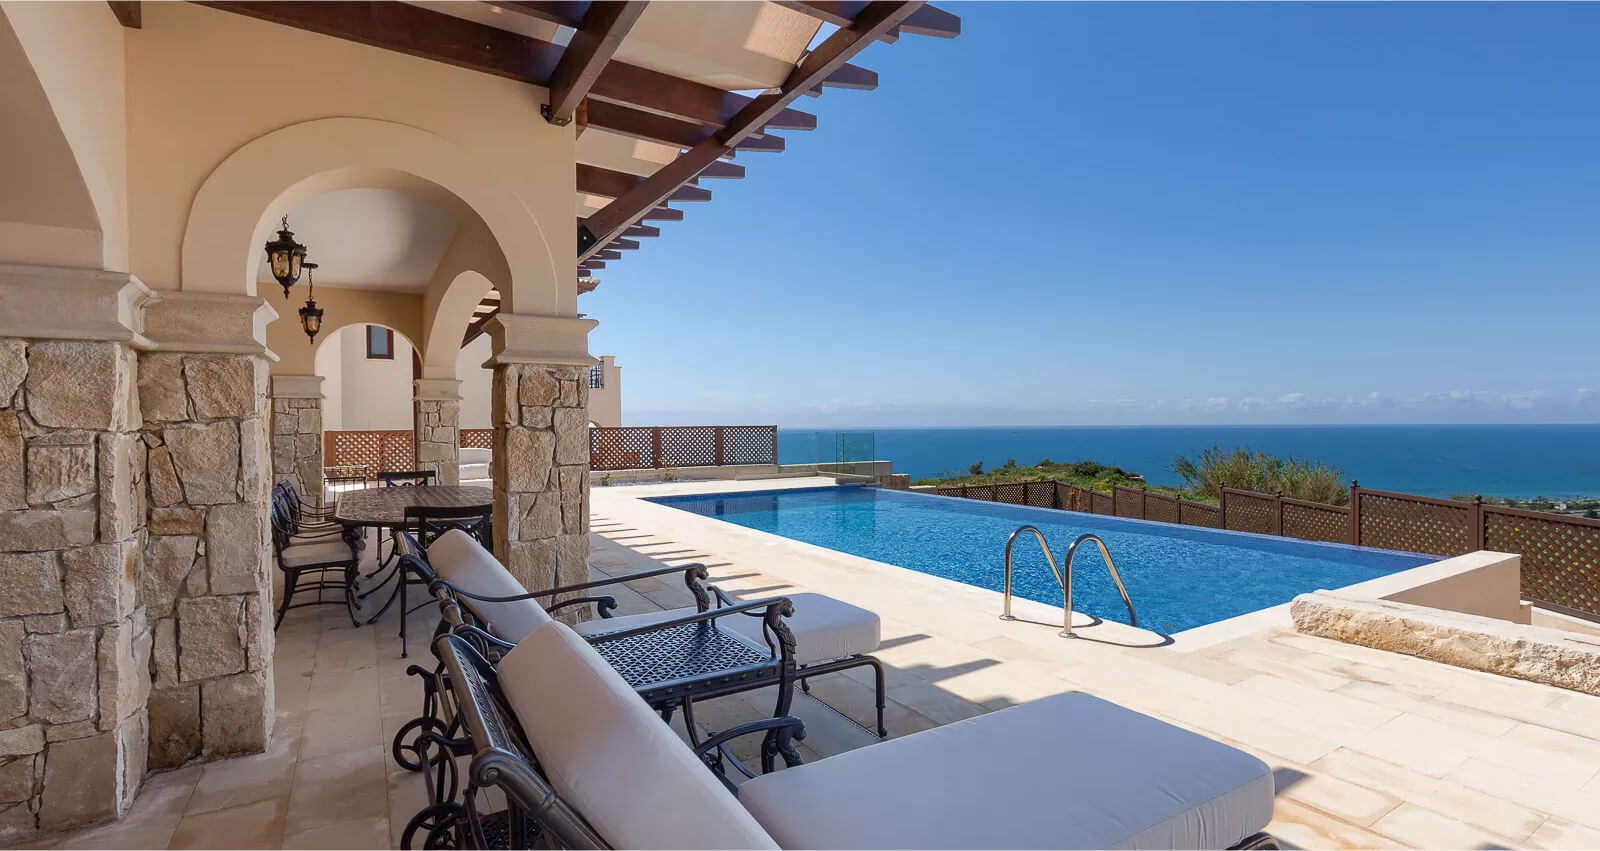 Aphrodite Hills Holiday Residences: Superb properties and amenities